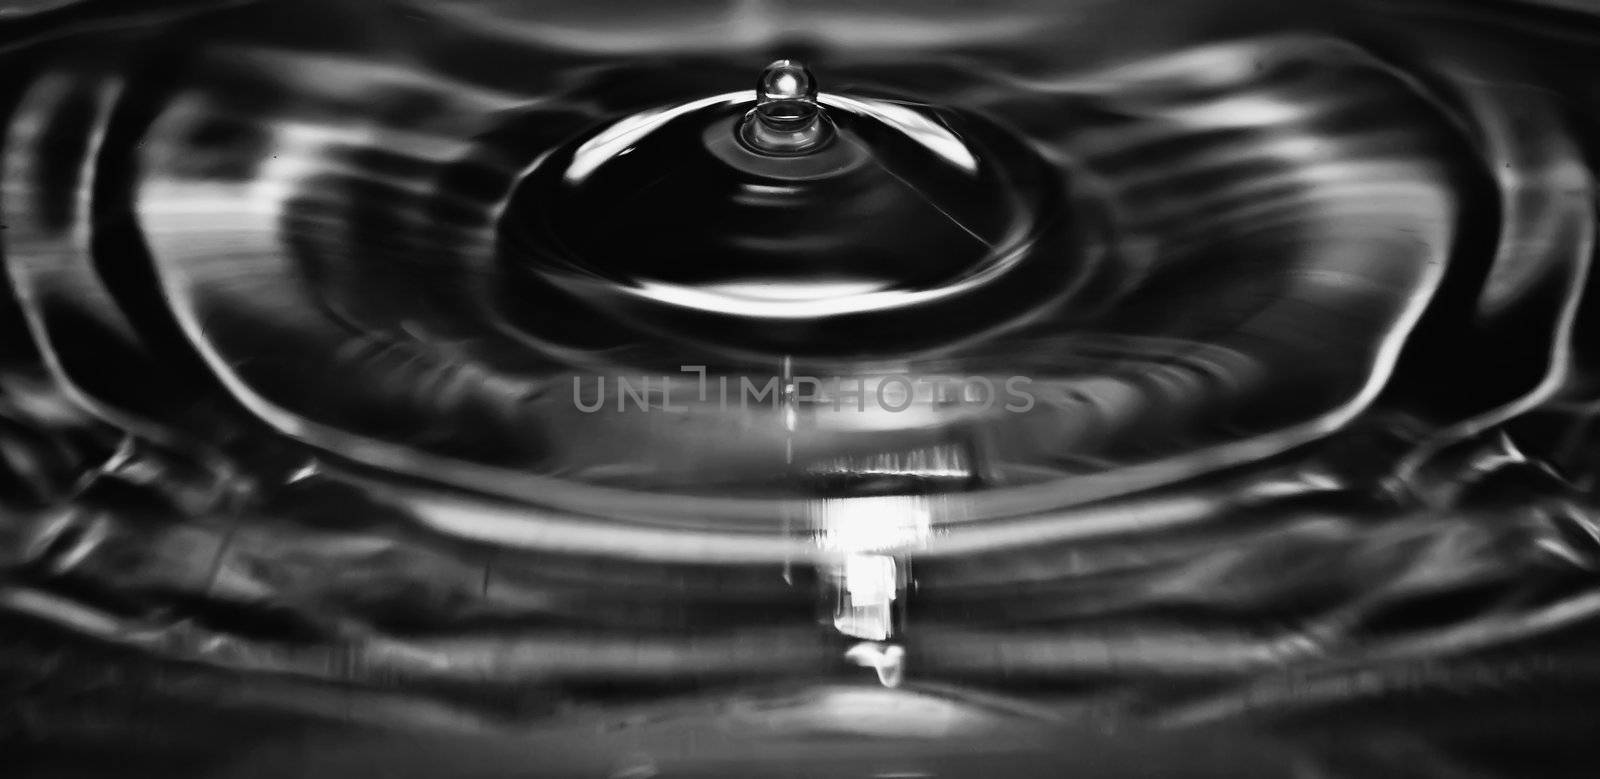 Abstract image showing ripples of water ideal as backdrop